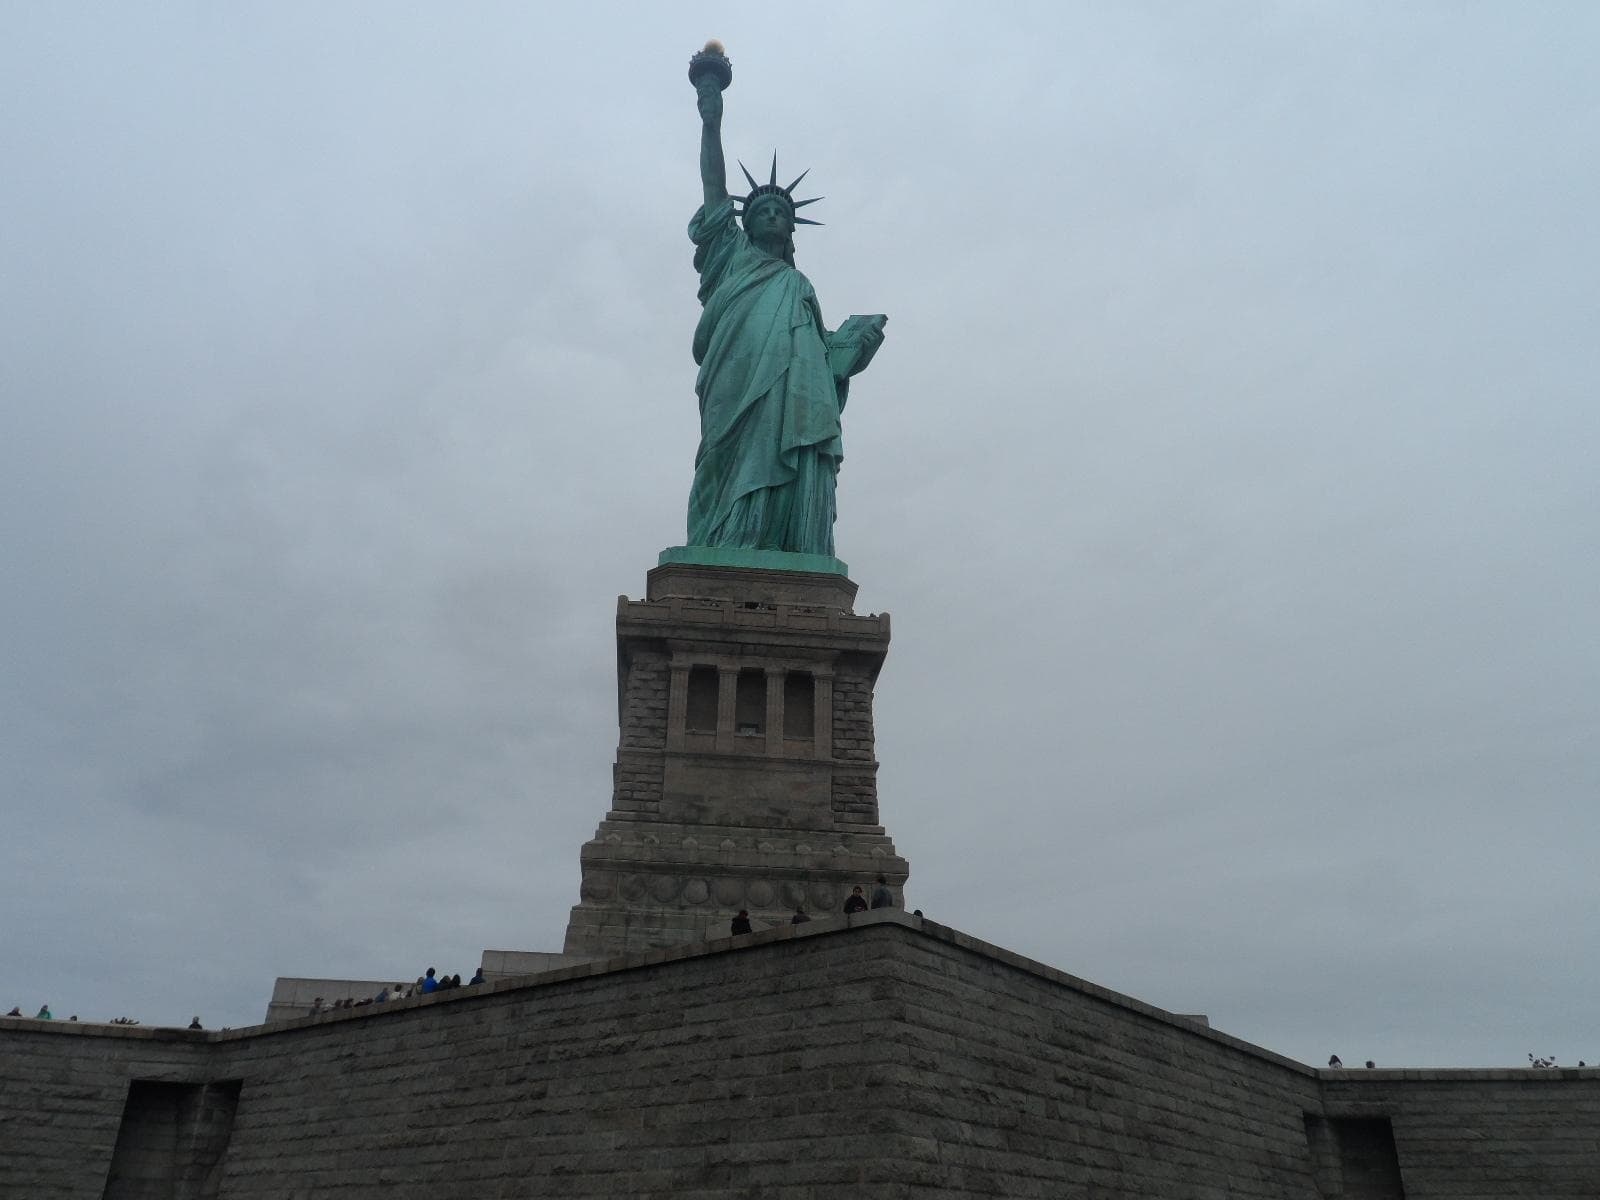 Standing in front of the Statue of Liberty; photo credit: Katherine Michel